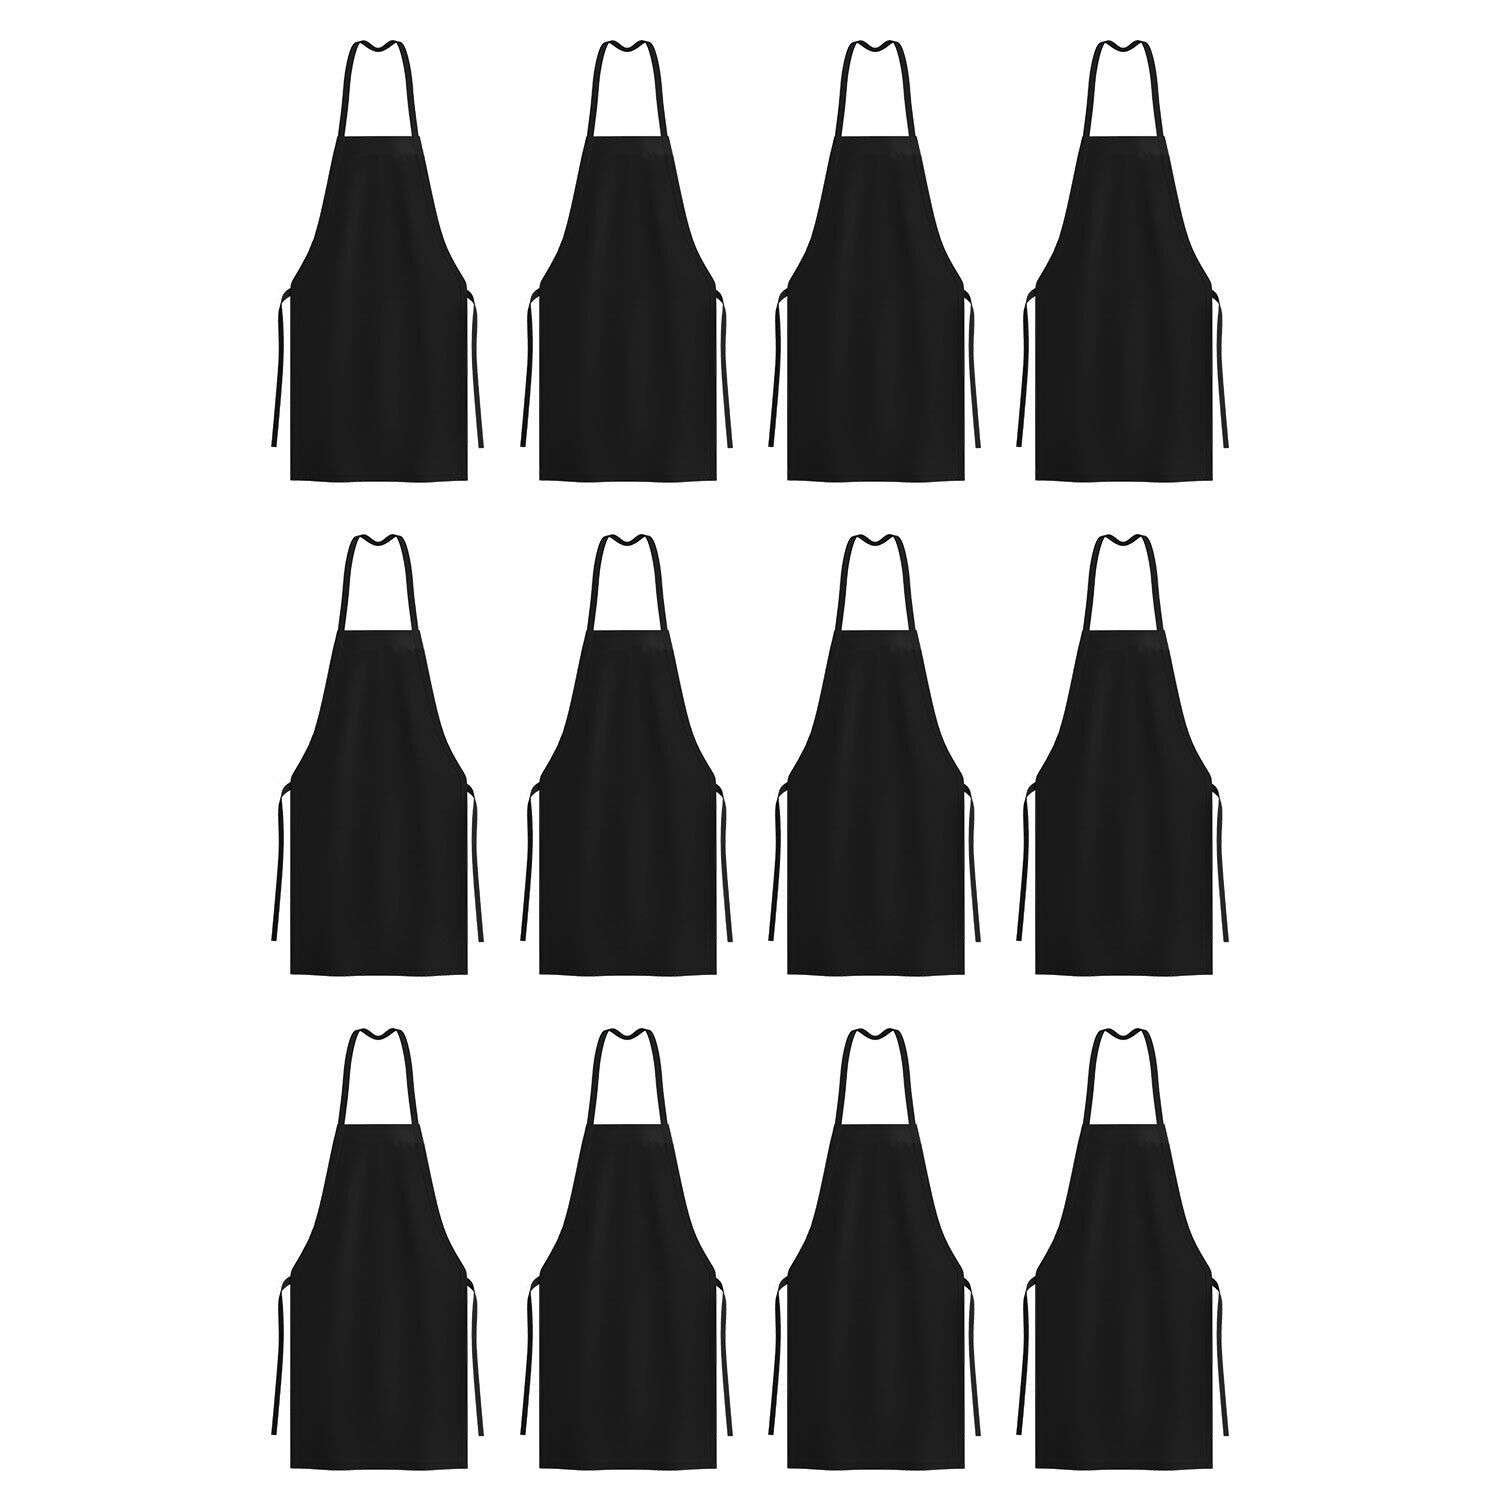 12 Pack of Kitchen Aprons - Full Bib Size Polyester Apron - Black Red or White Arkwright Does Not Apply